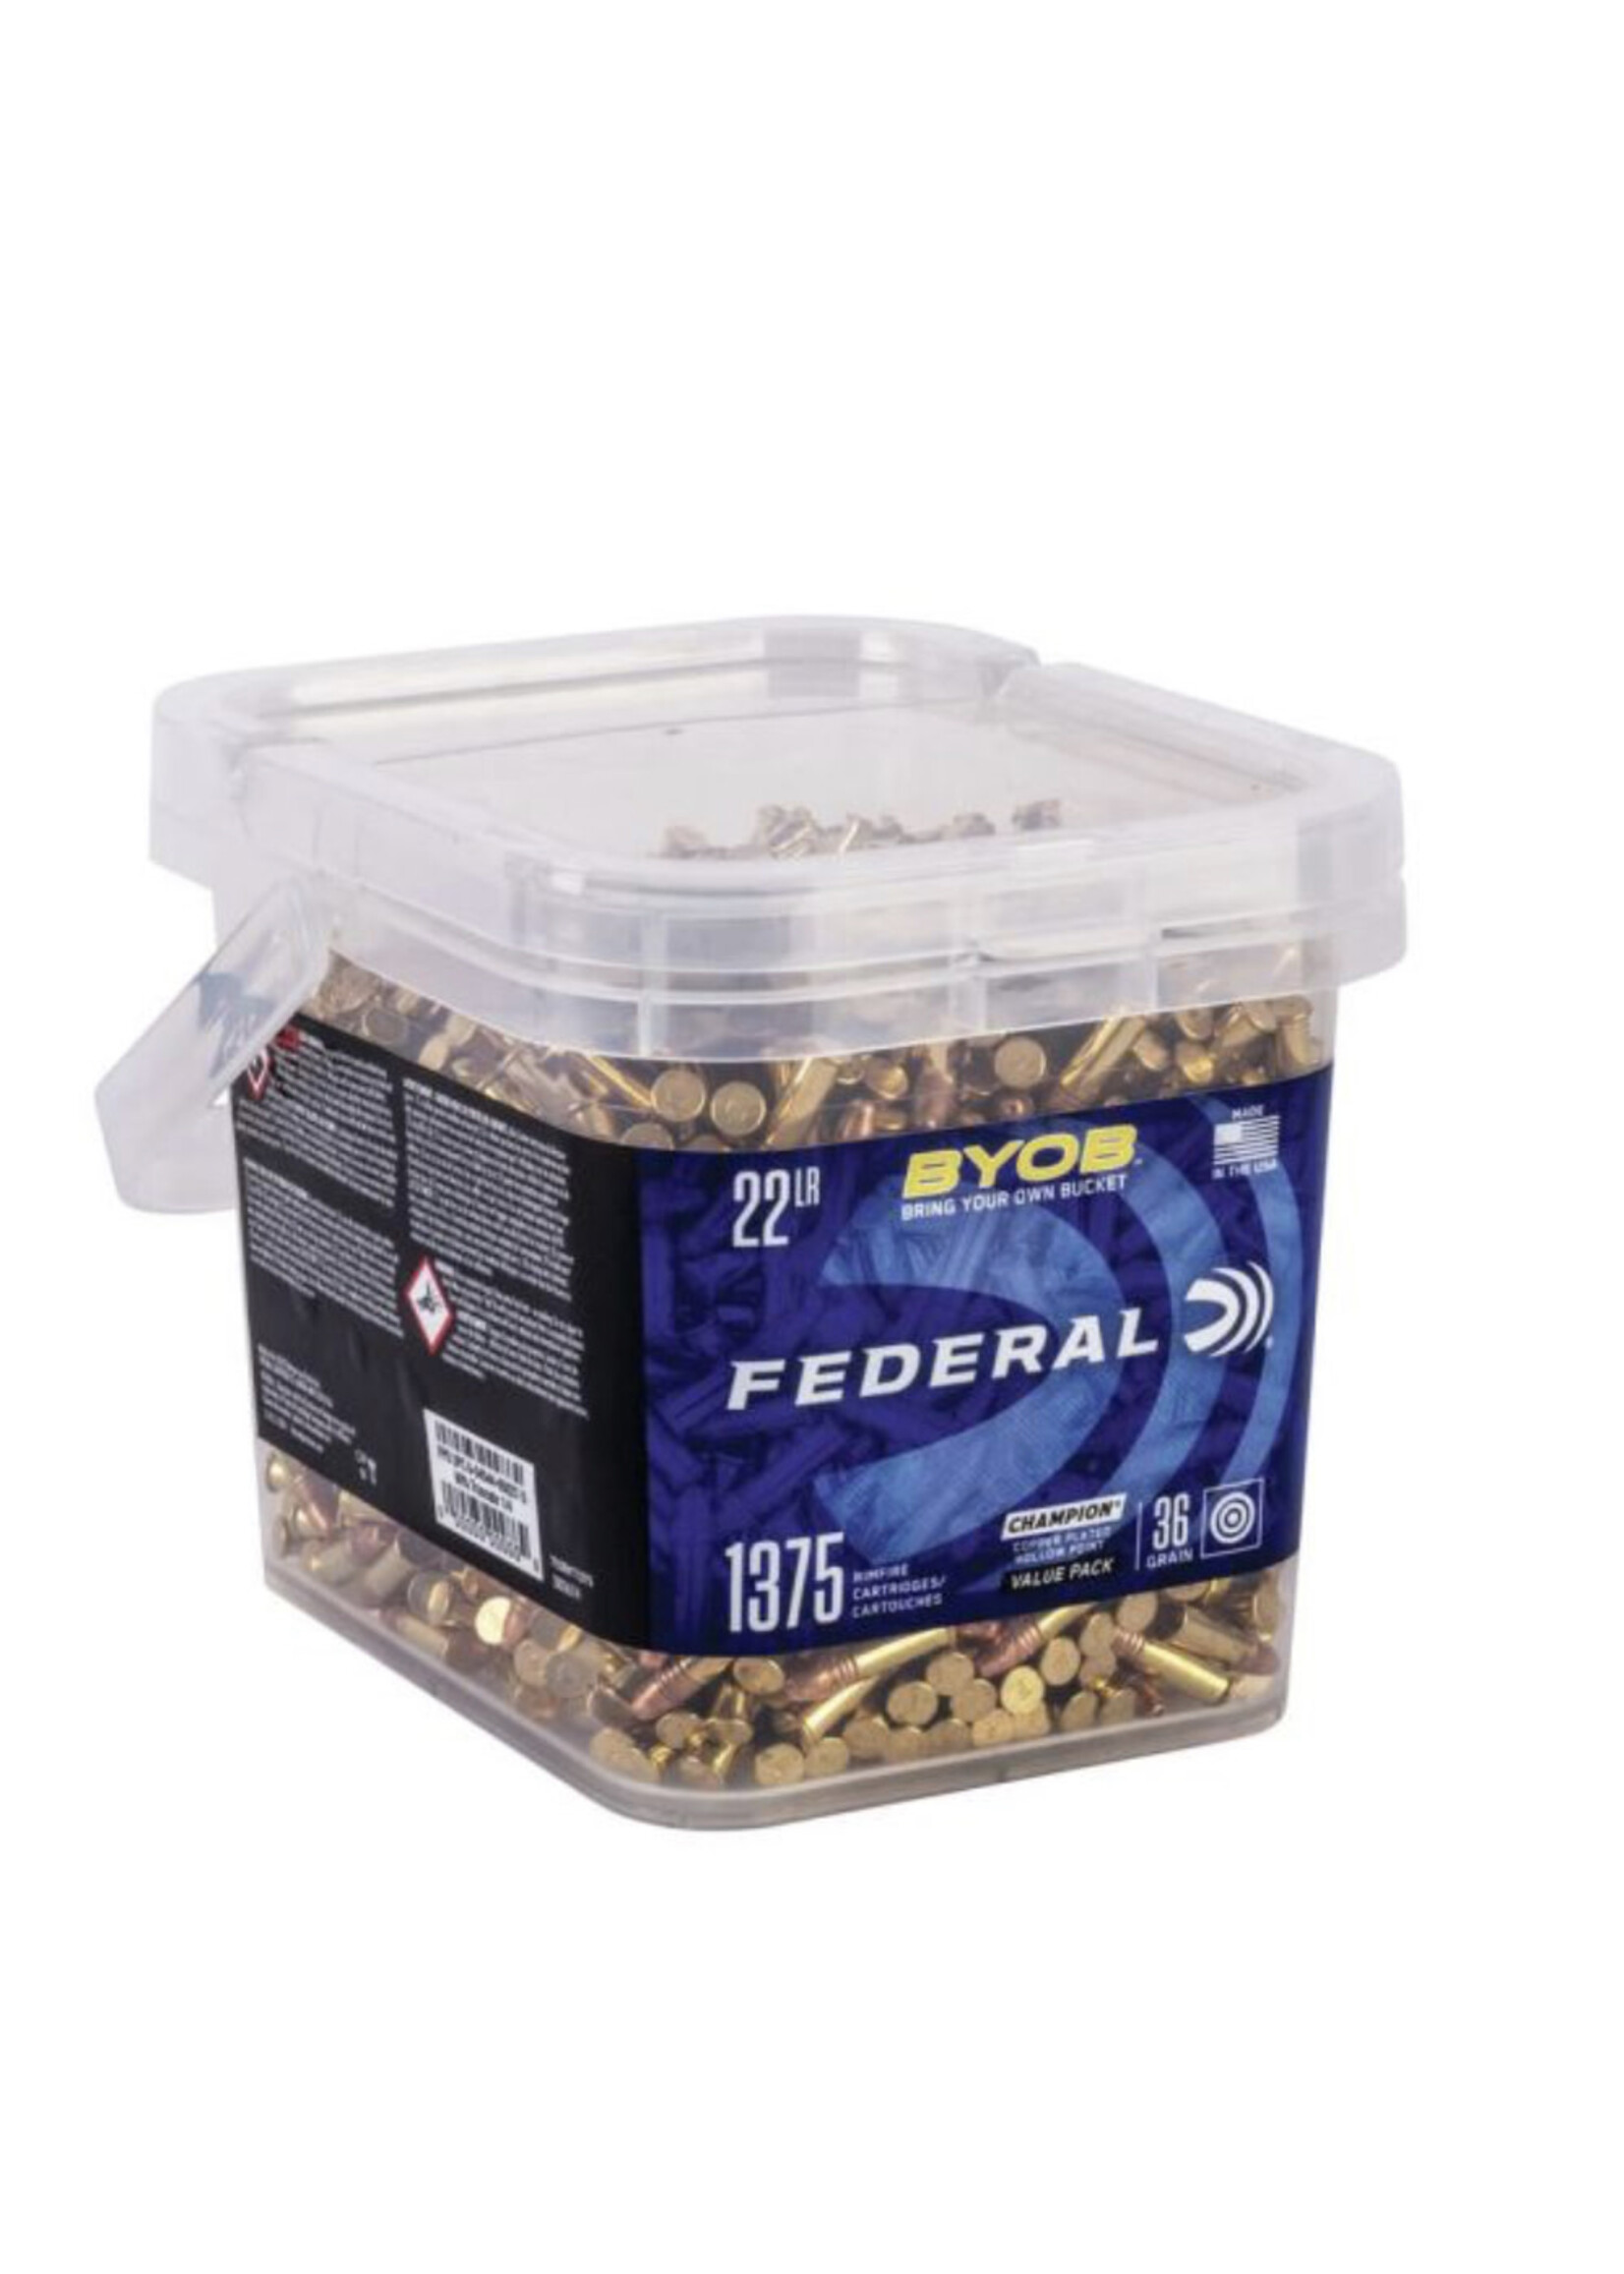 FEDERAL FEDERAL 22LR 36GR COPPER PLATED HOLLOW POINT VALUE PACK 1375 BYOB